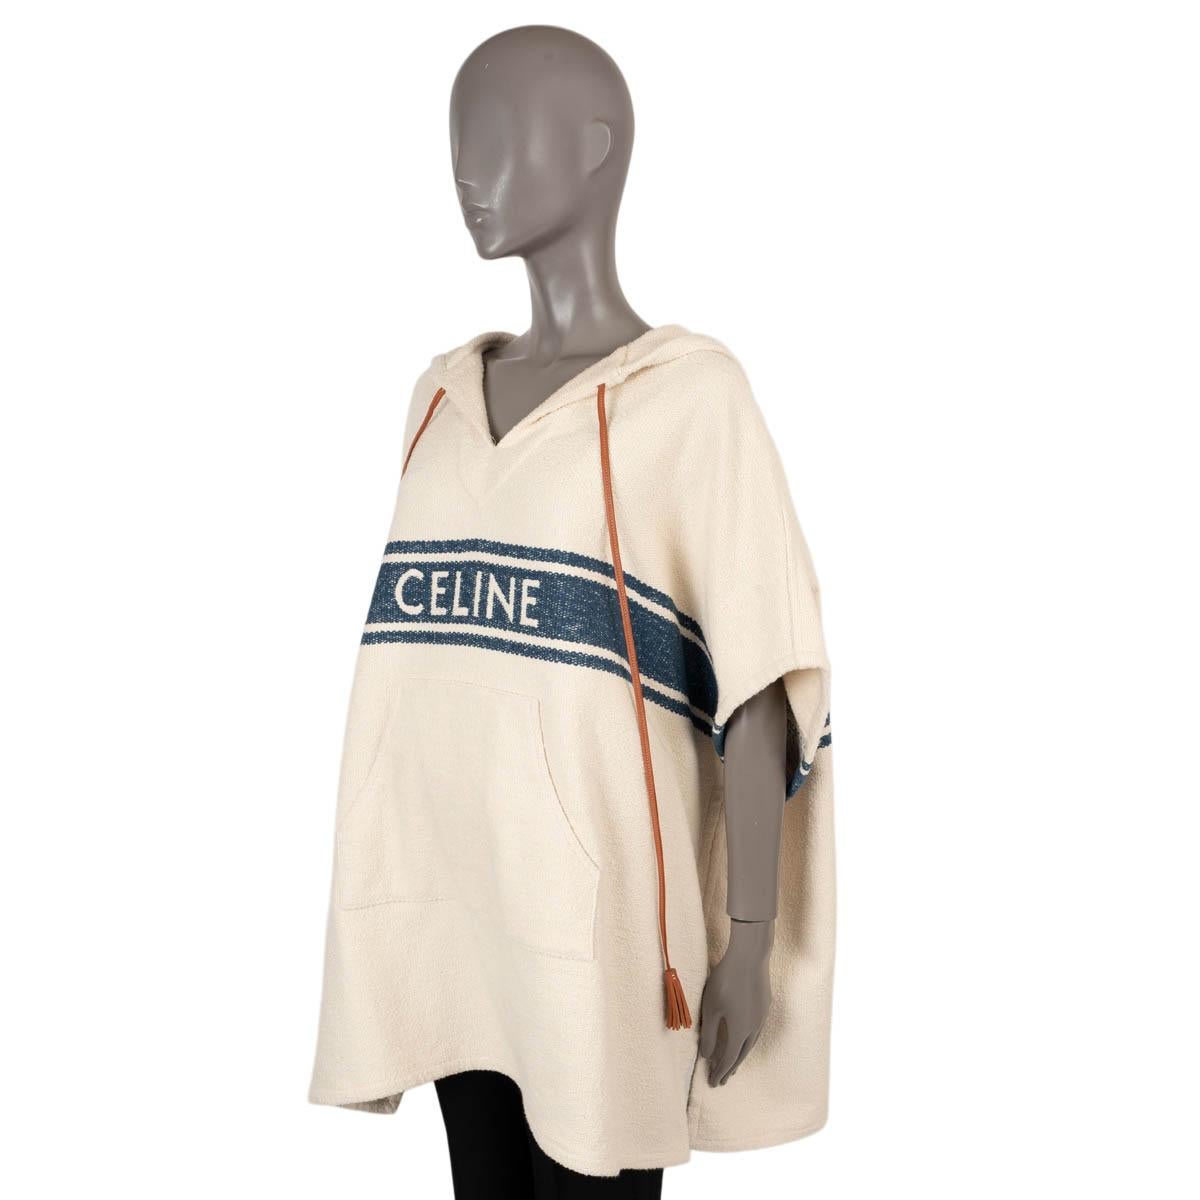 100% authentic Celine Baja cape poncho in cream and navy cotton (91%) and polyamide (9%). The design features a hood, a faux drawstring in cognac brown leather with tassels and kangaroo pocket on the front. Has been worn once or twice and is in